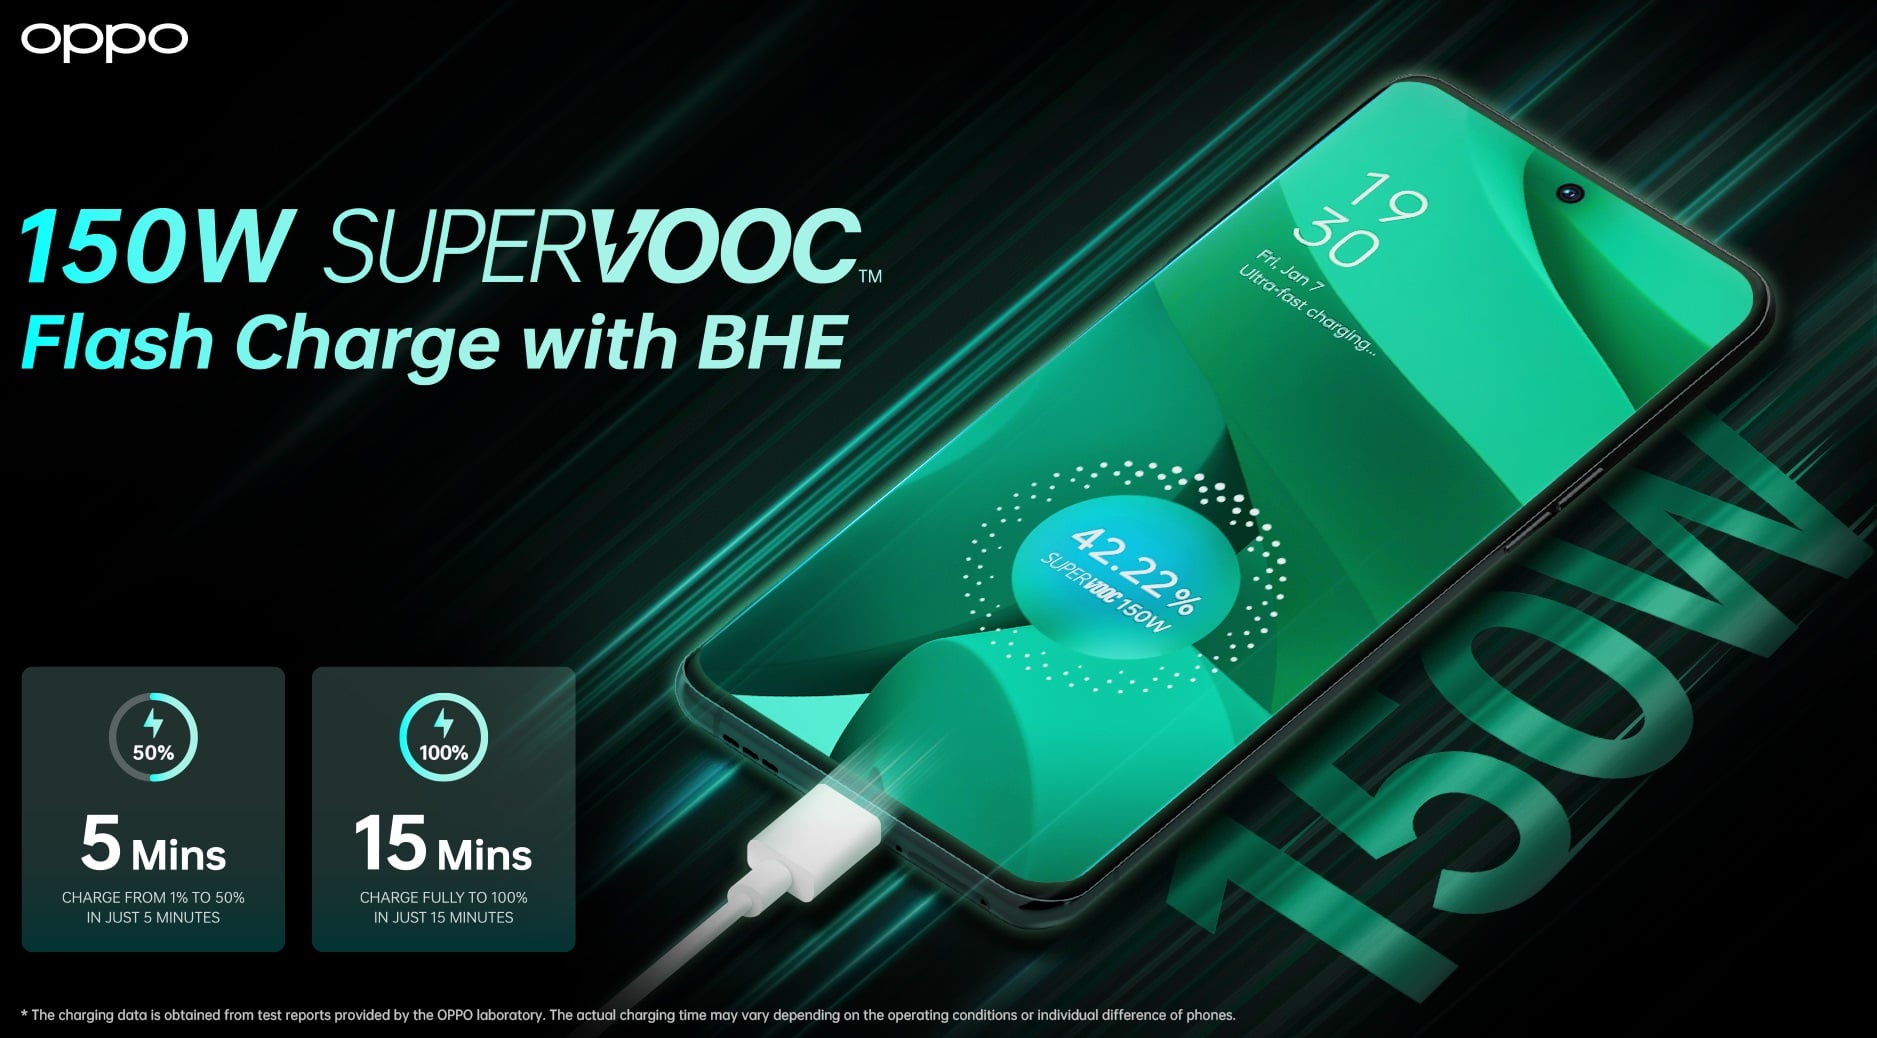 OPPO announces the new SuperVOOC 150W fast charging technology. And that's just the beginning